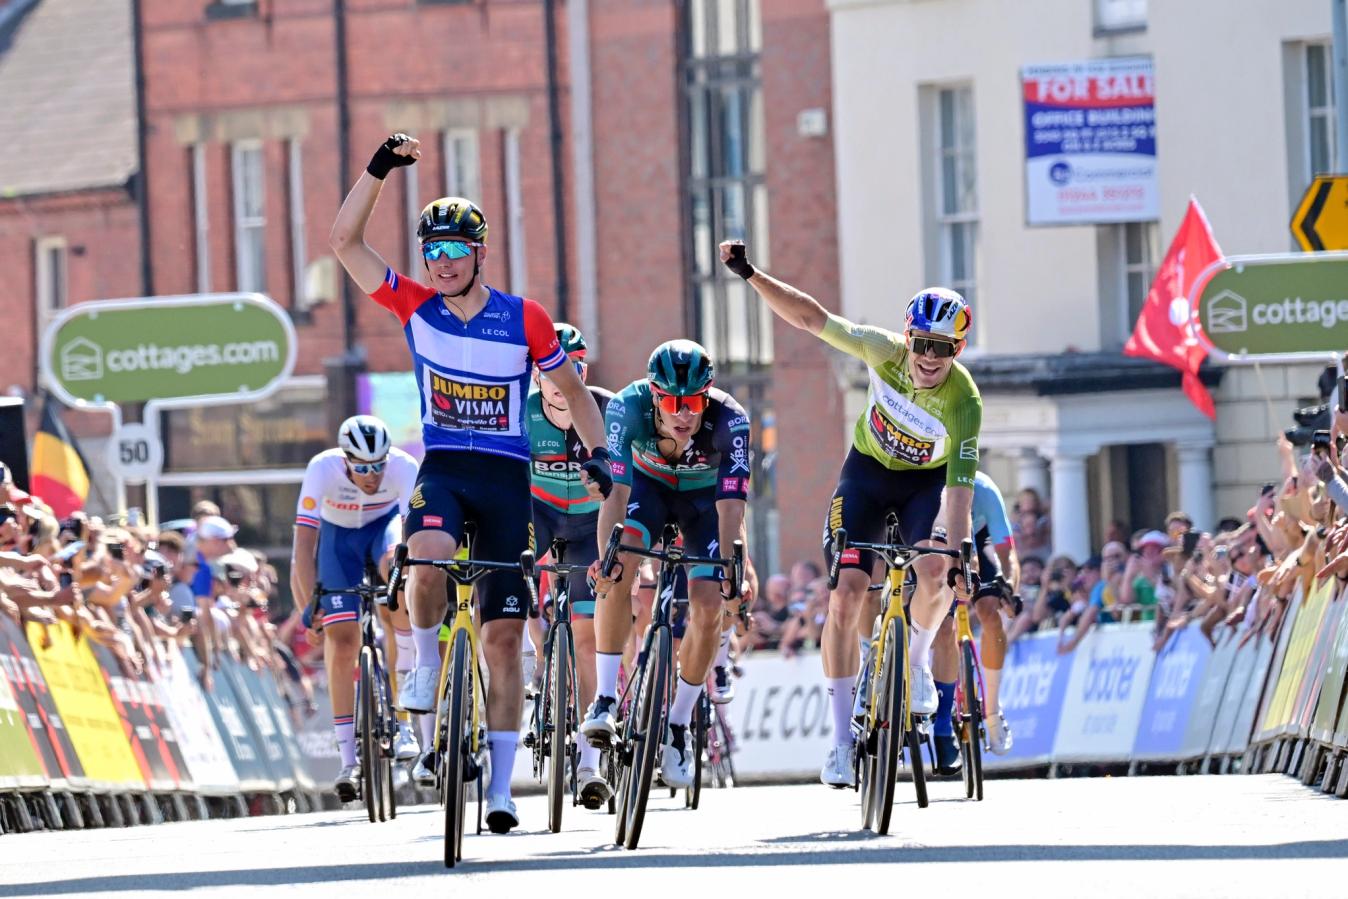 Olav Kooij sprinted to victory in Wrexham on stage 2 of the Tour of Britain